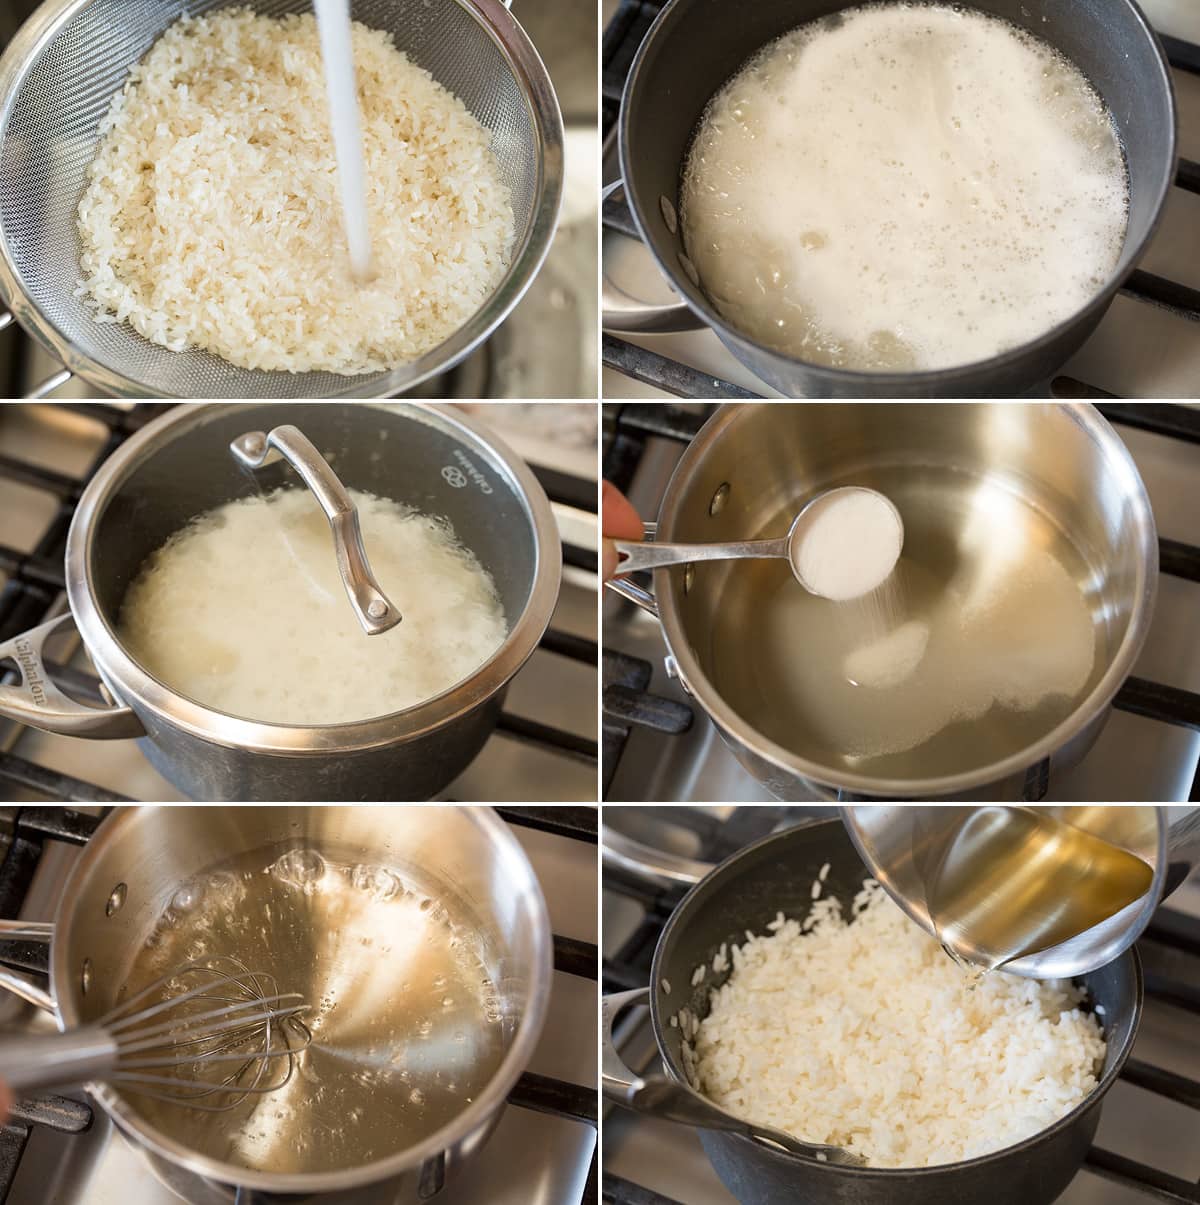 Collage of six photos showing steps of making sushi rice in a saucepan.